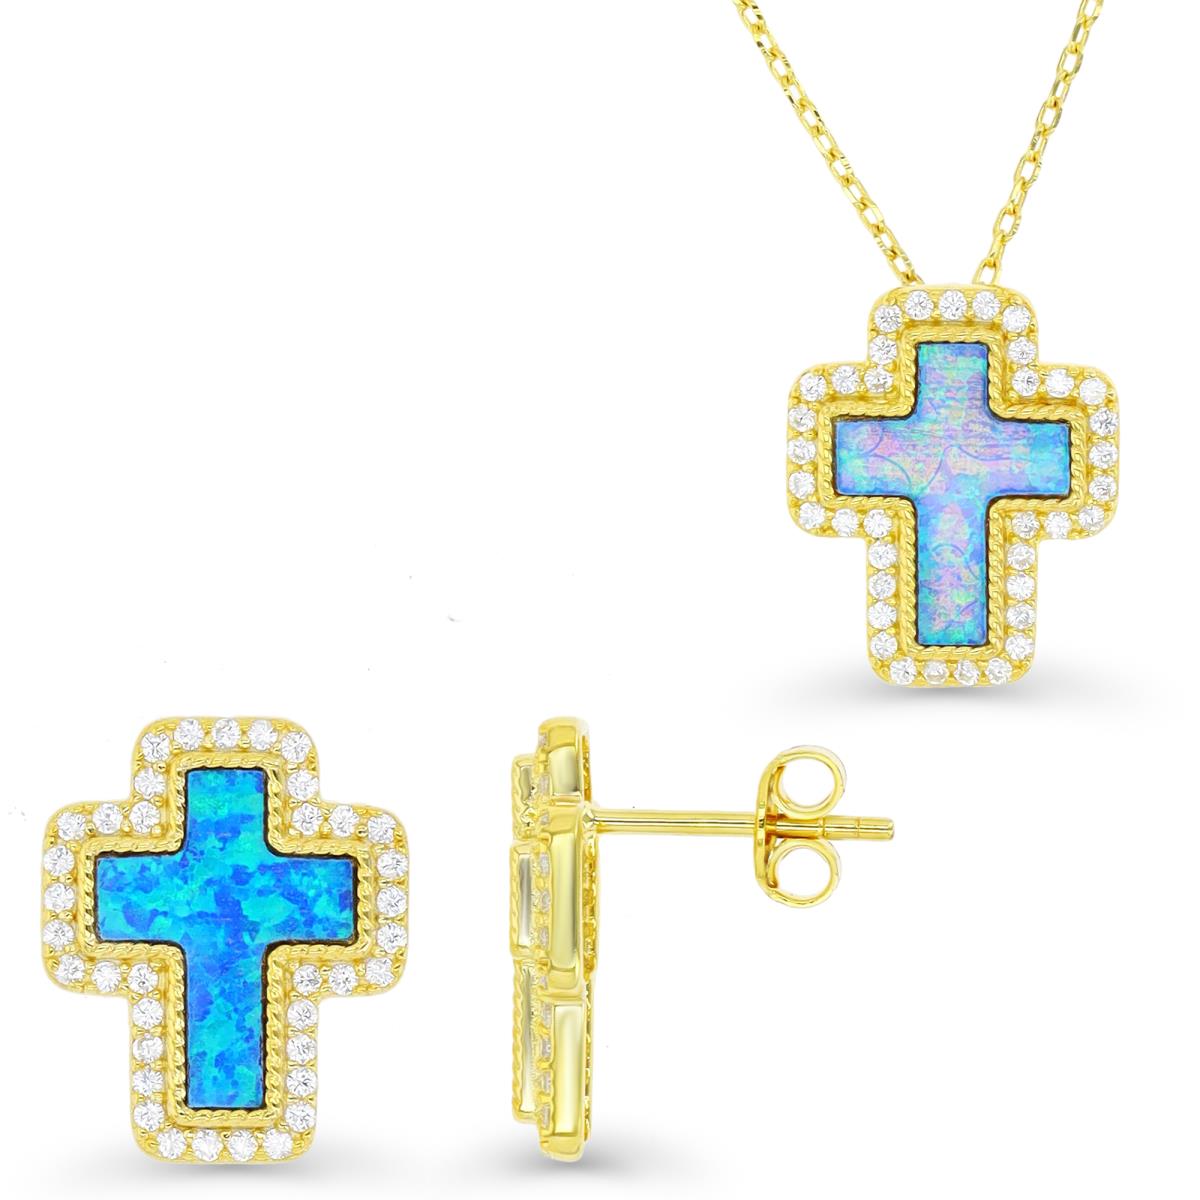 Sterling Silver Yellow 1M & Cr. Blue Opal and White CZ Cross Earrings and Necklace Set